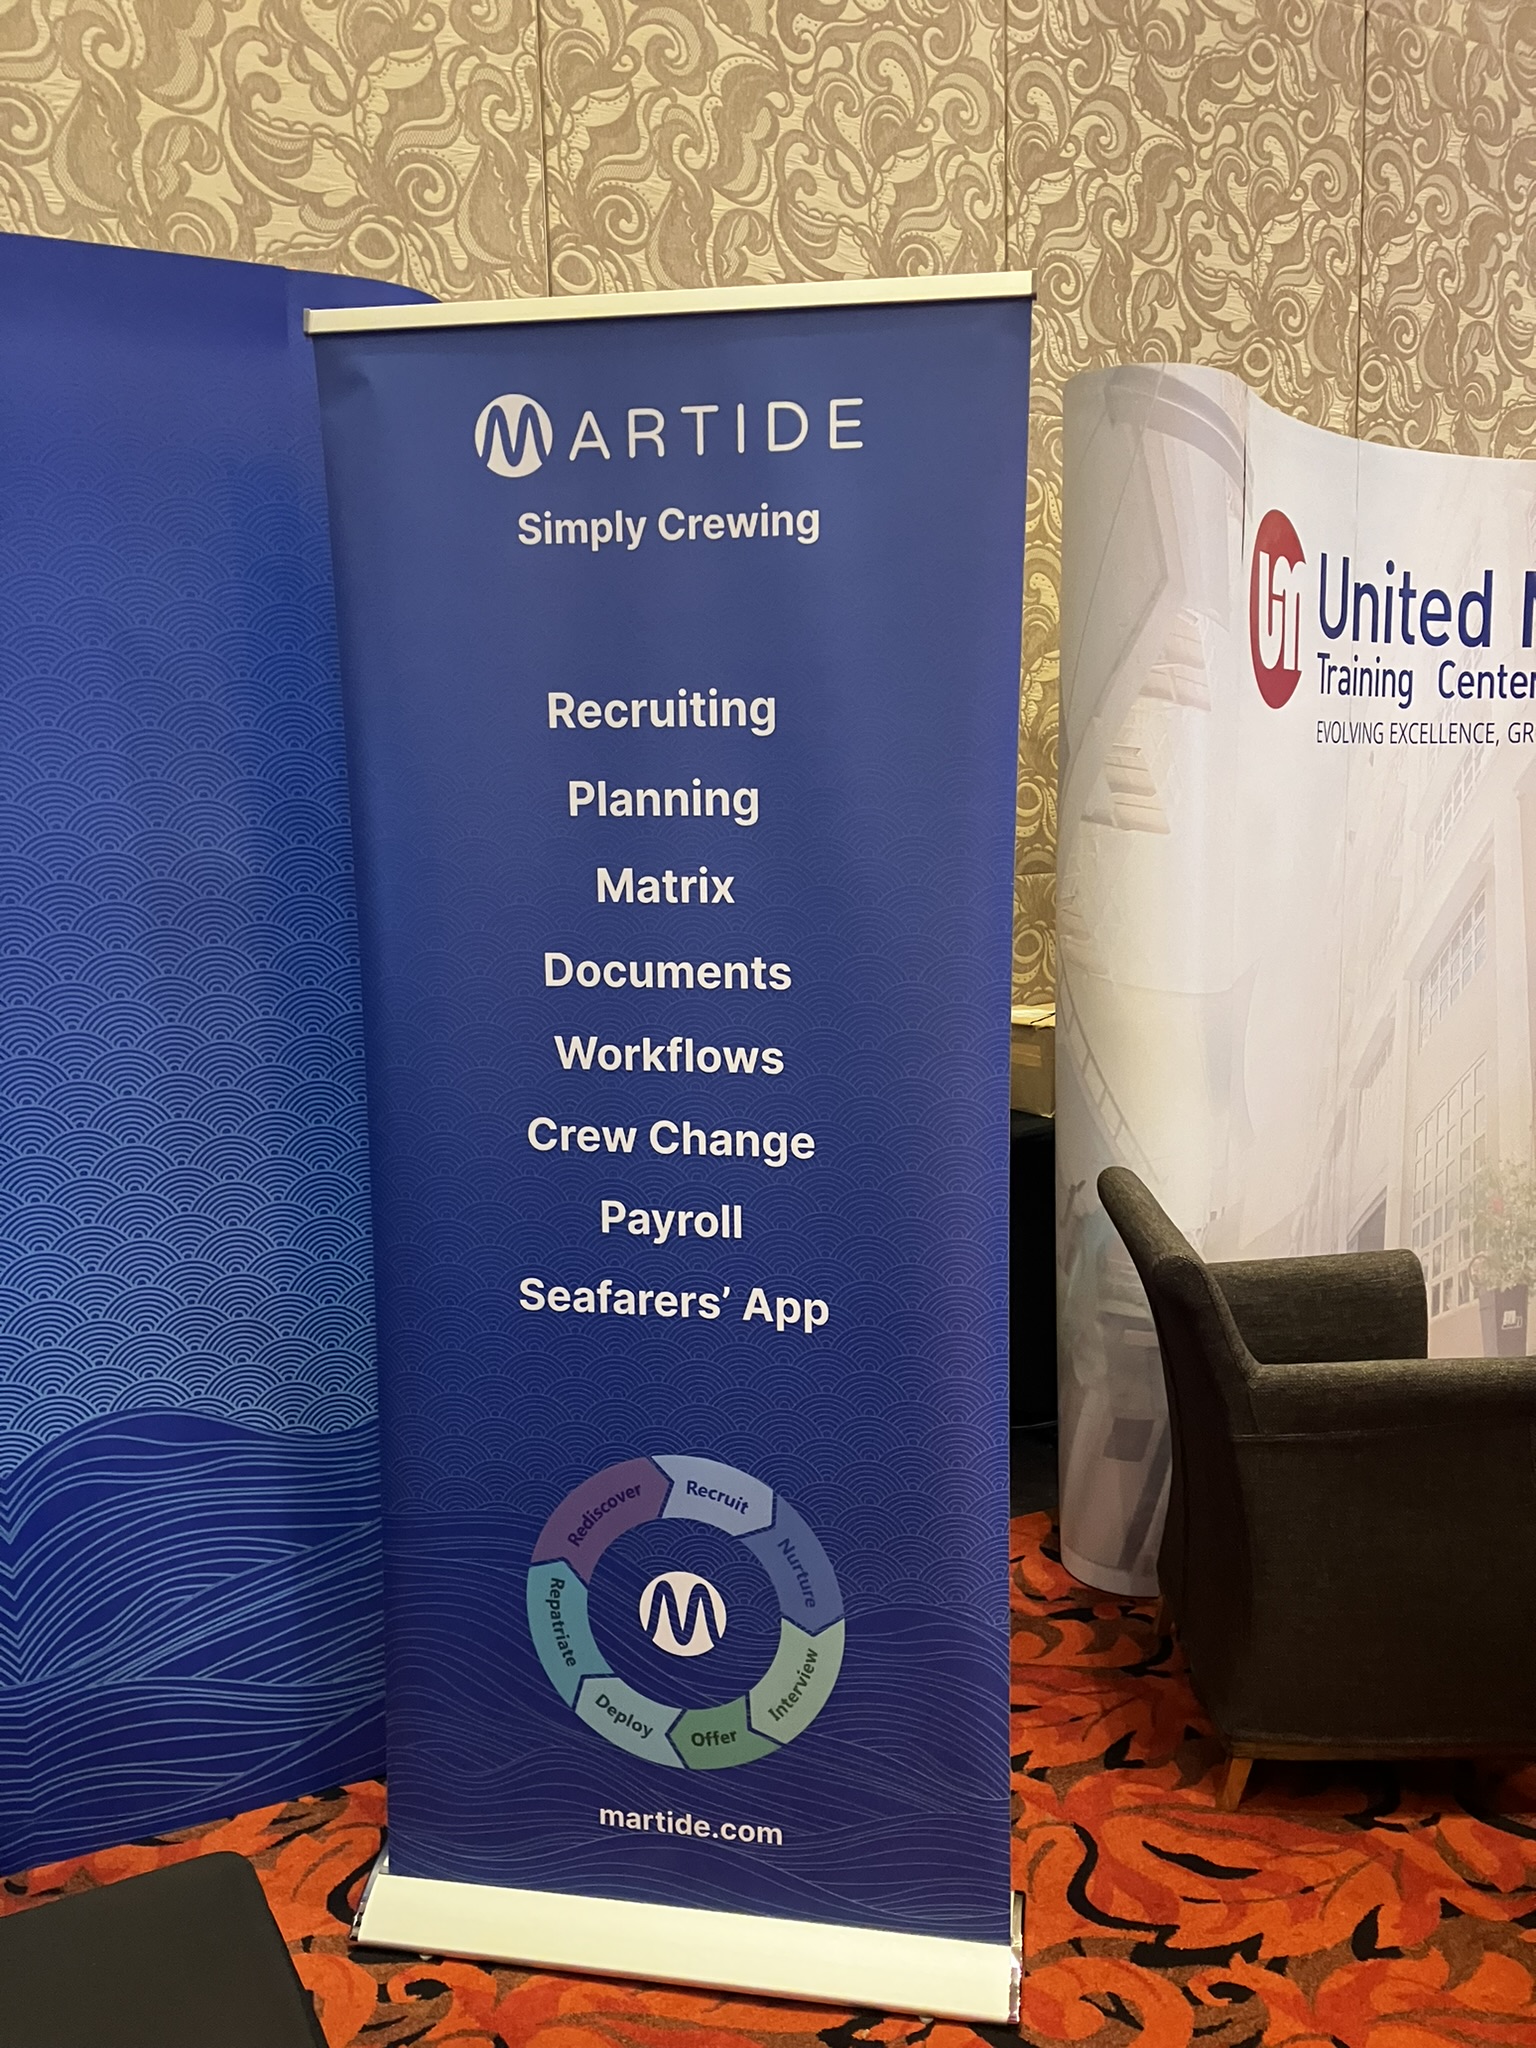 Martide Pleased to Exhibit at CrewConnect Global